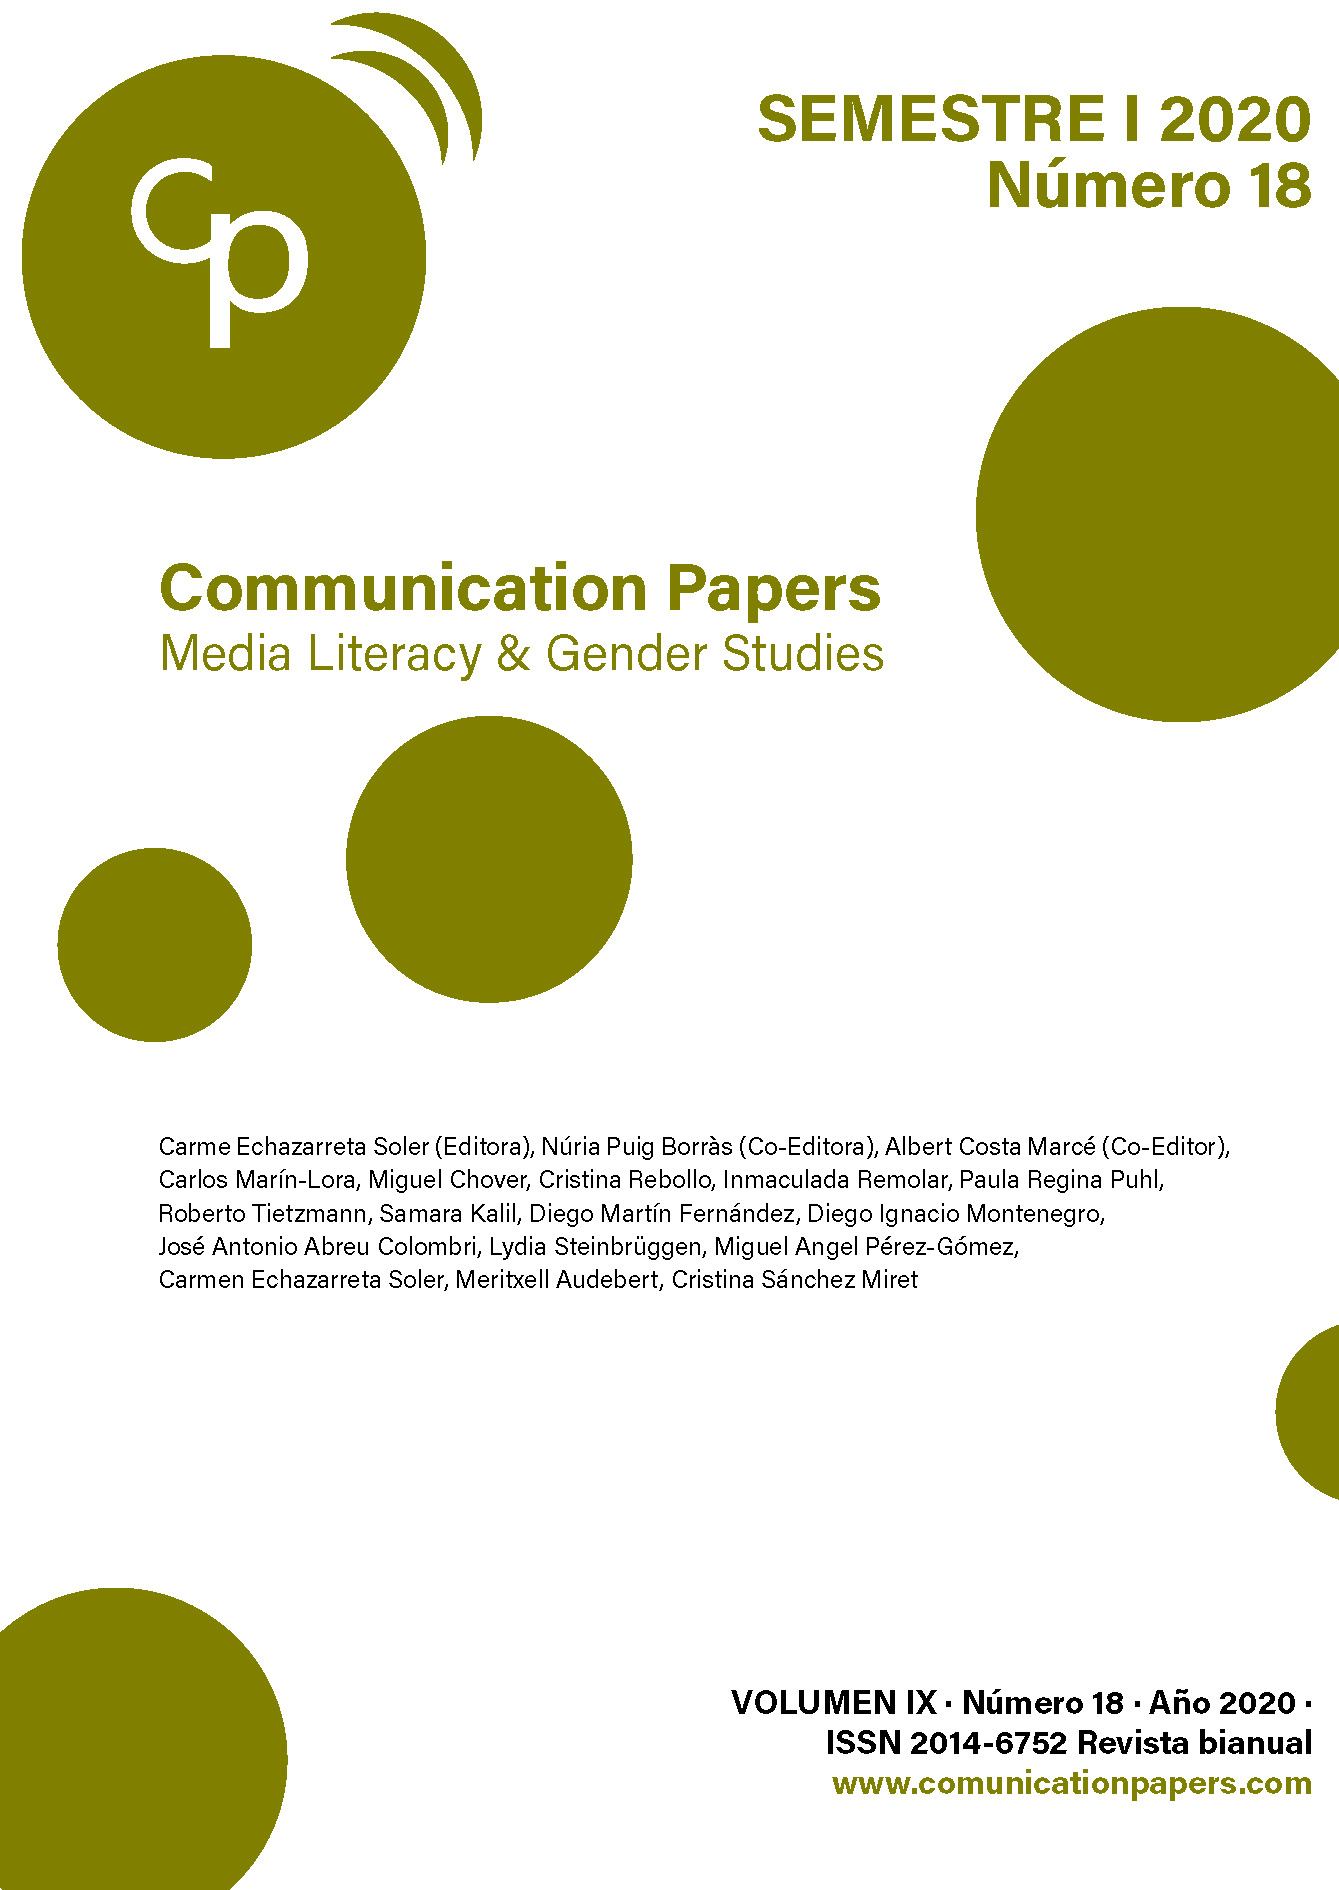 COMMUNICATION PAPERS 18